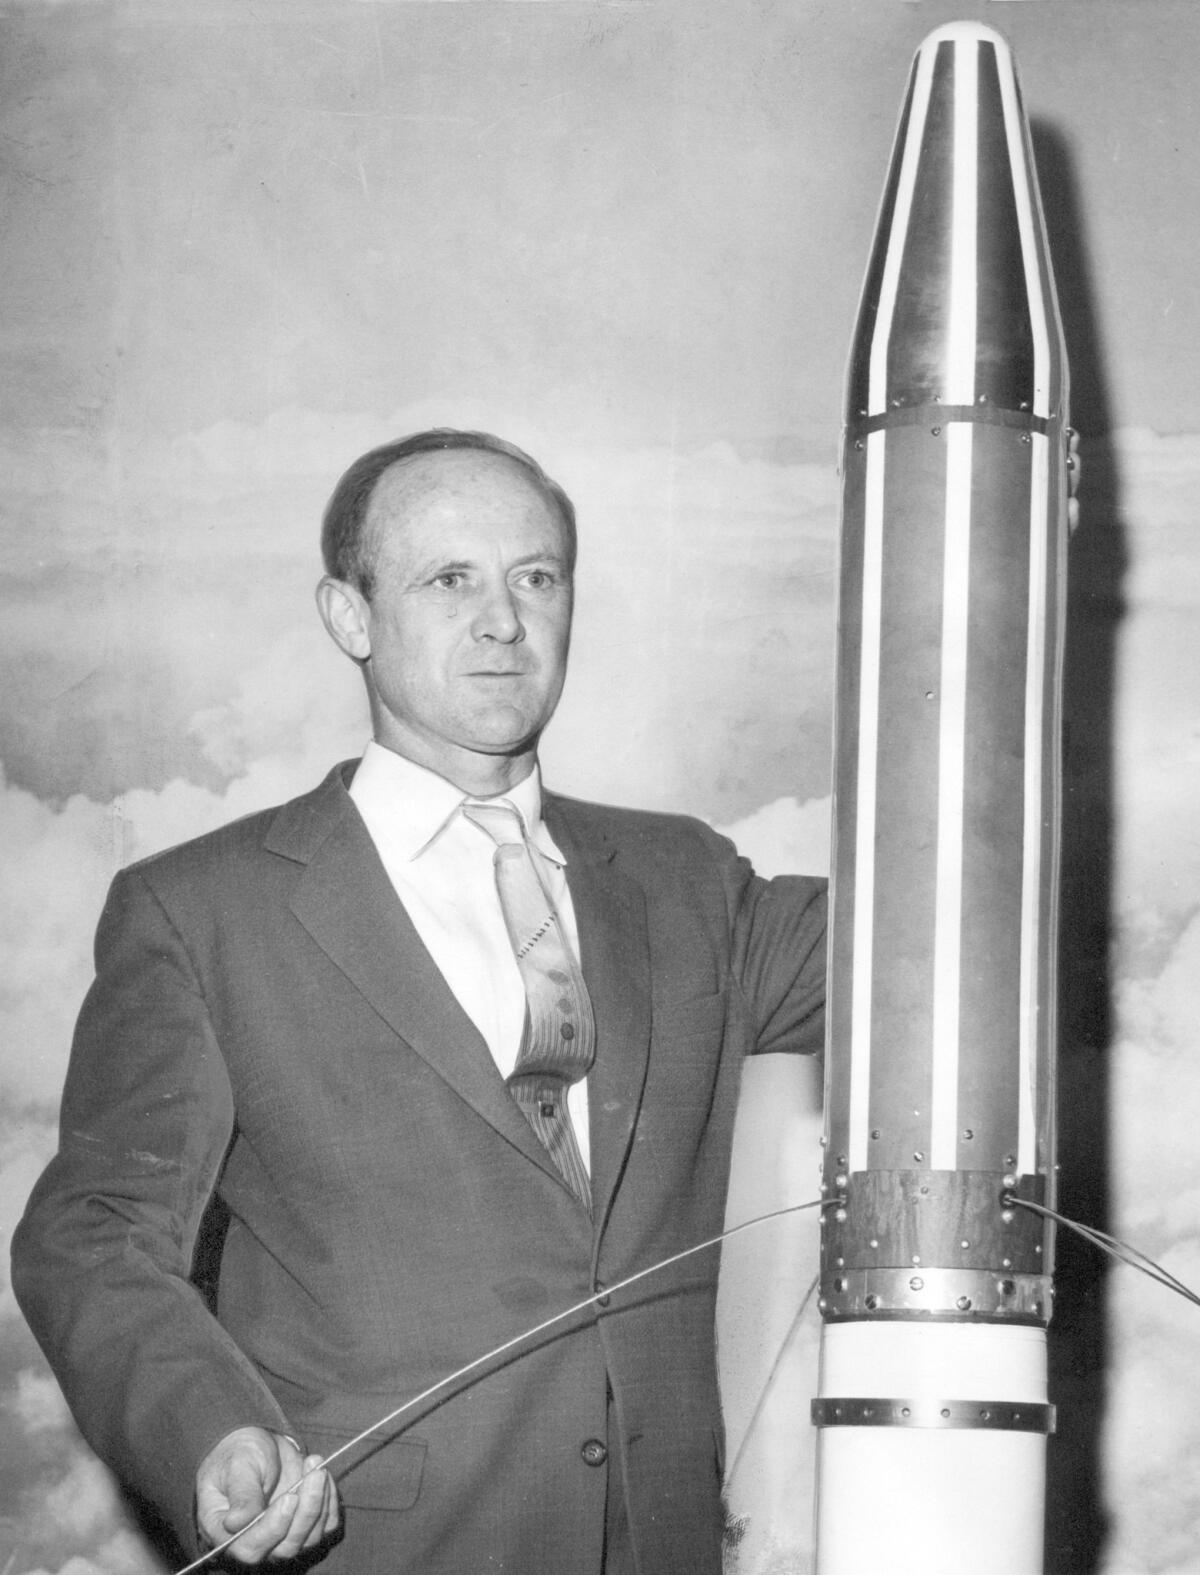 William Pickering stands with a model of the Explorer 1 satellite in 1958.